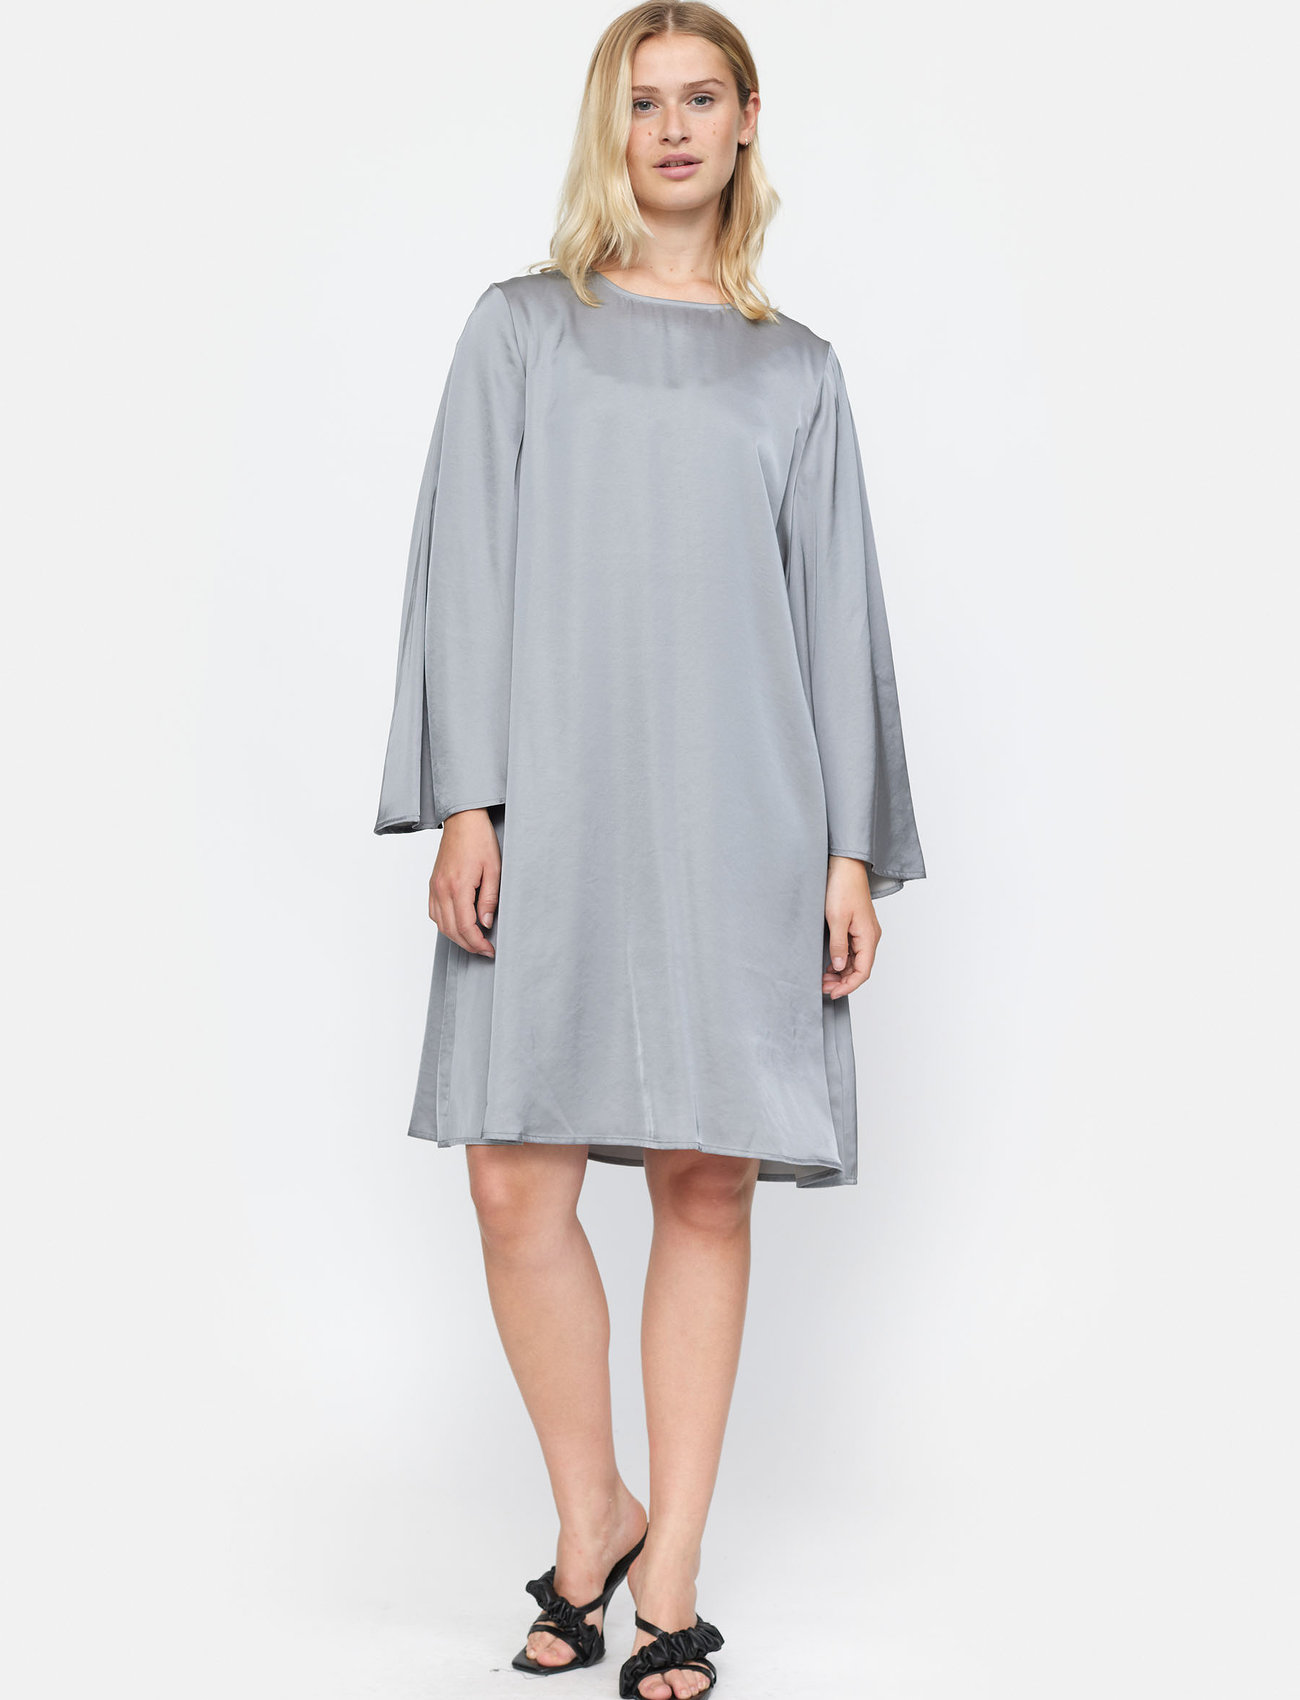 Soft Rebels - SRAbia Dress - party wear at outlet prices - sharkskin - 1